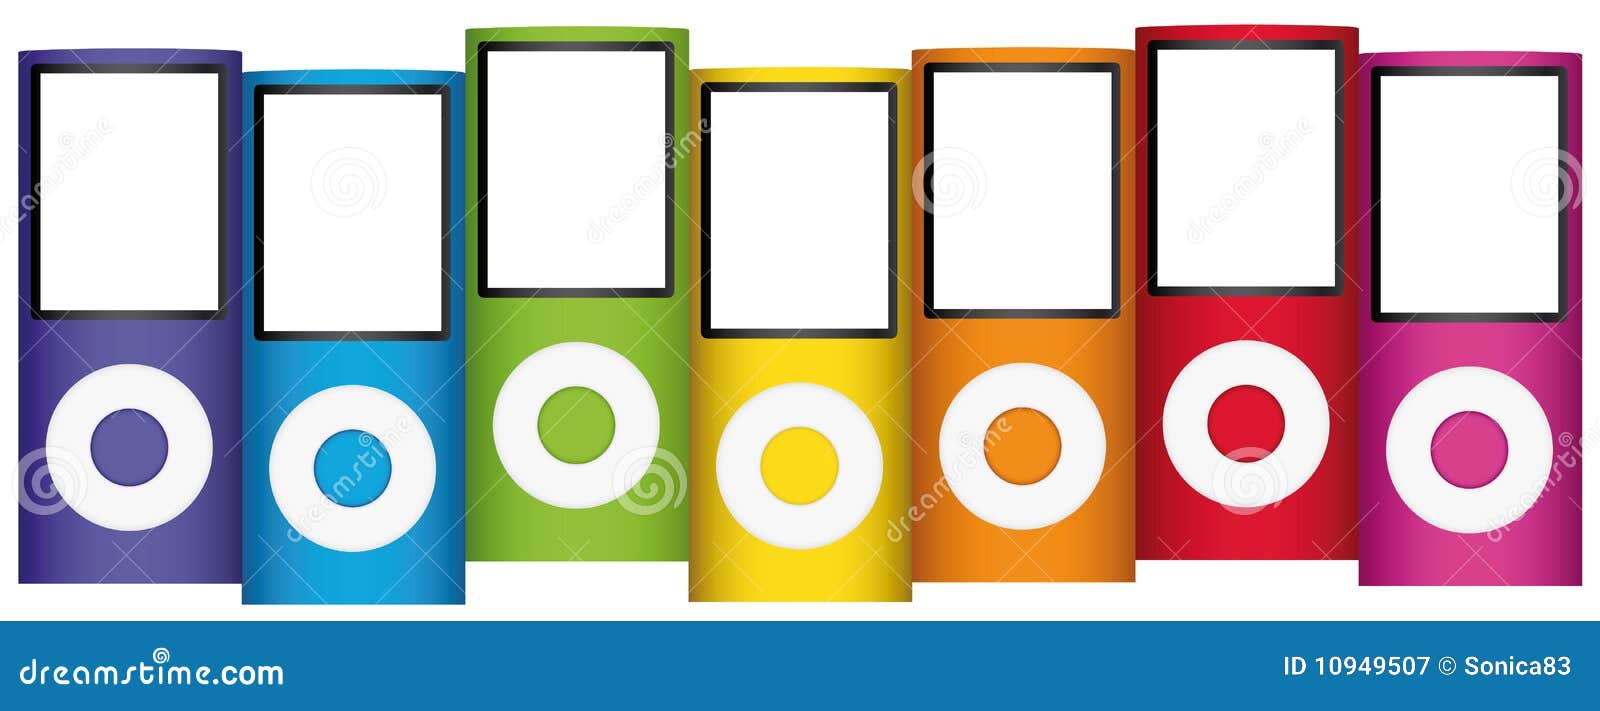 multicolor mp3 music players